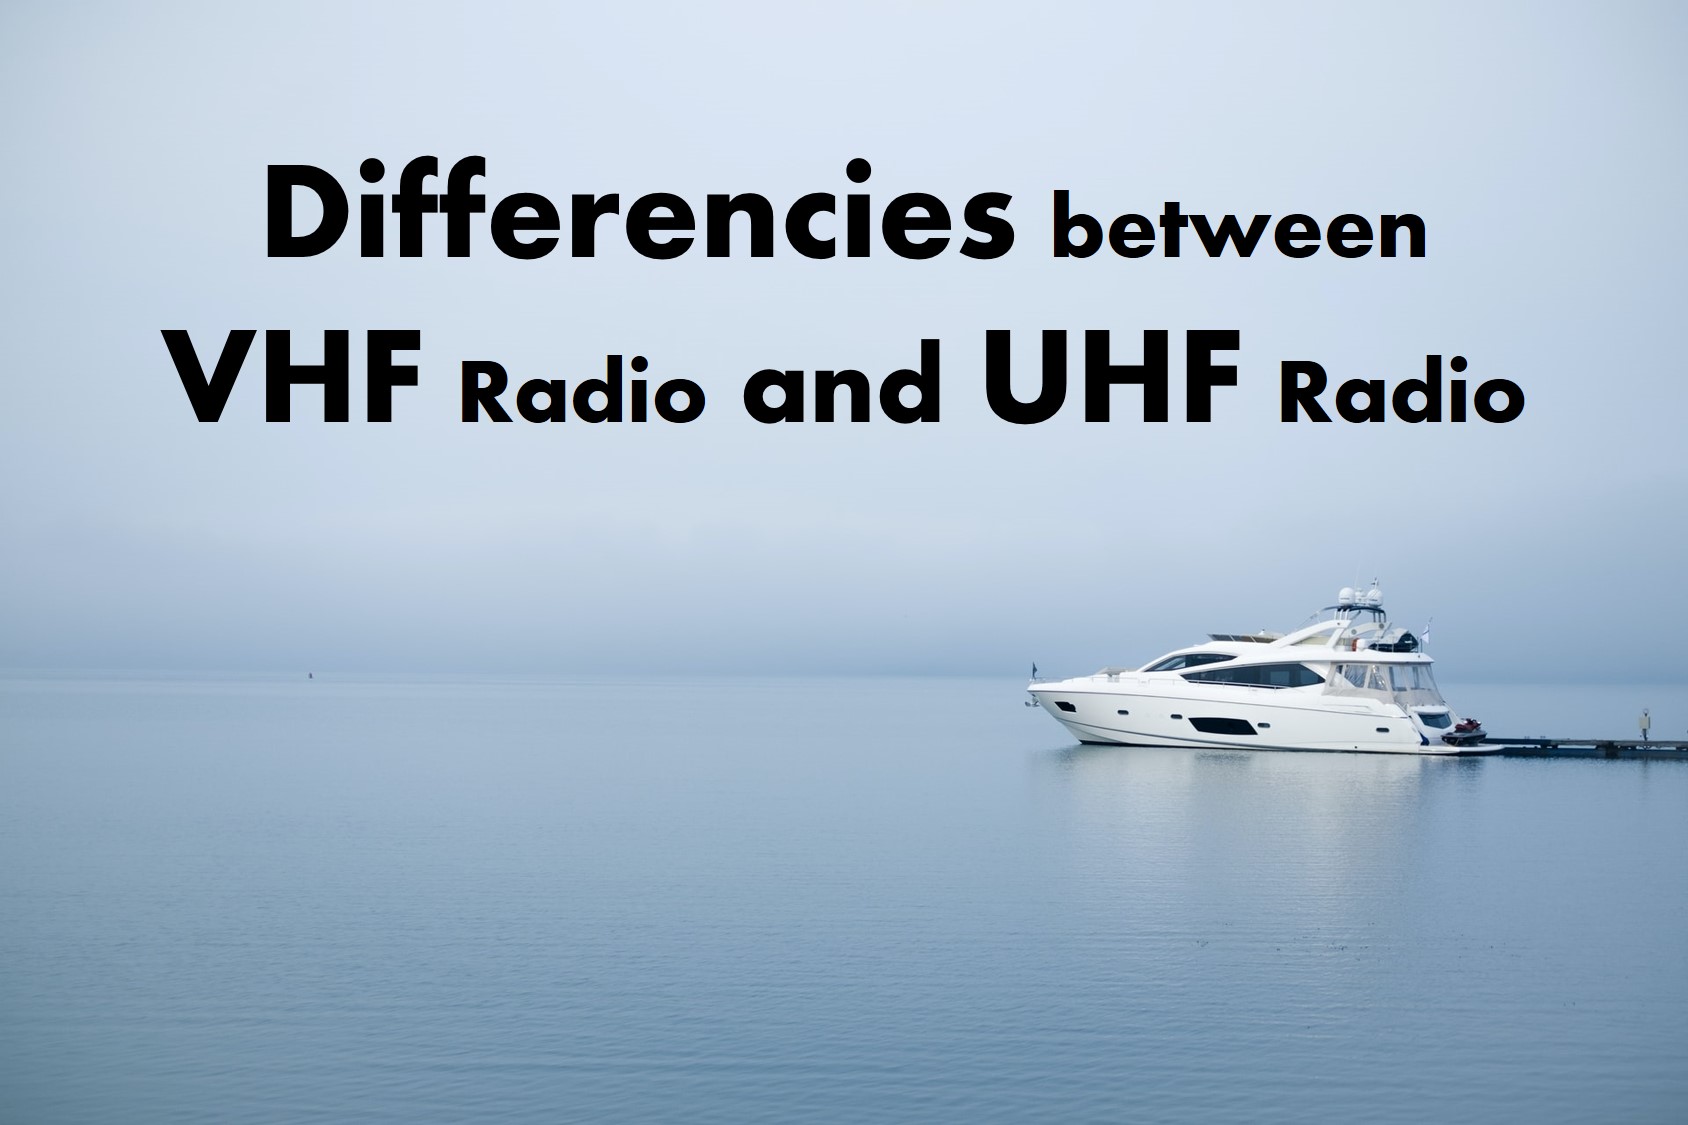 What are the differency between VHF and UHF radios?